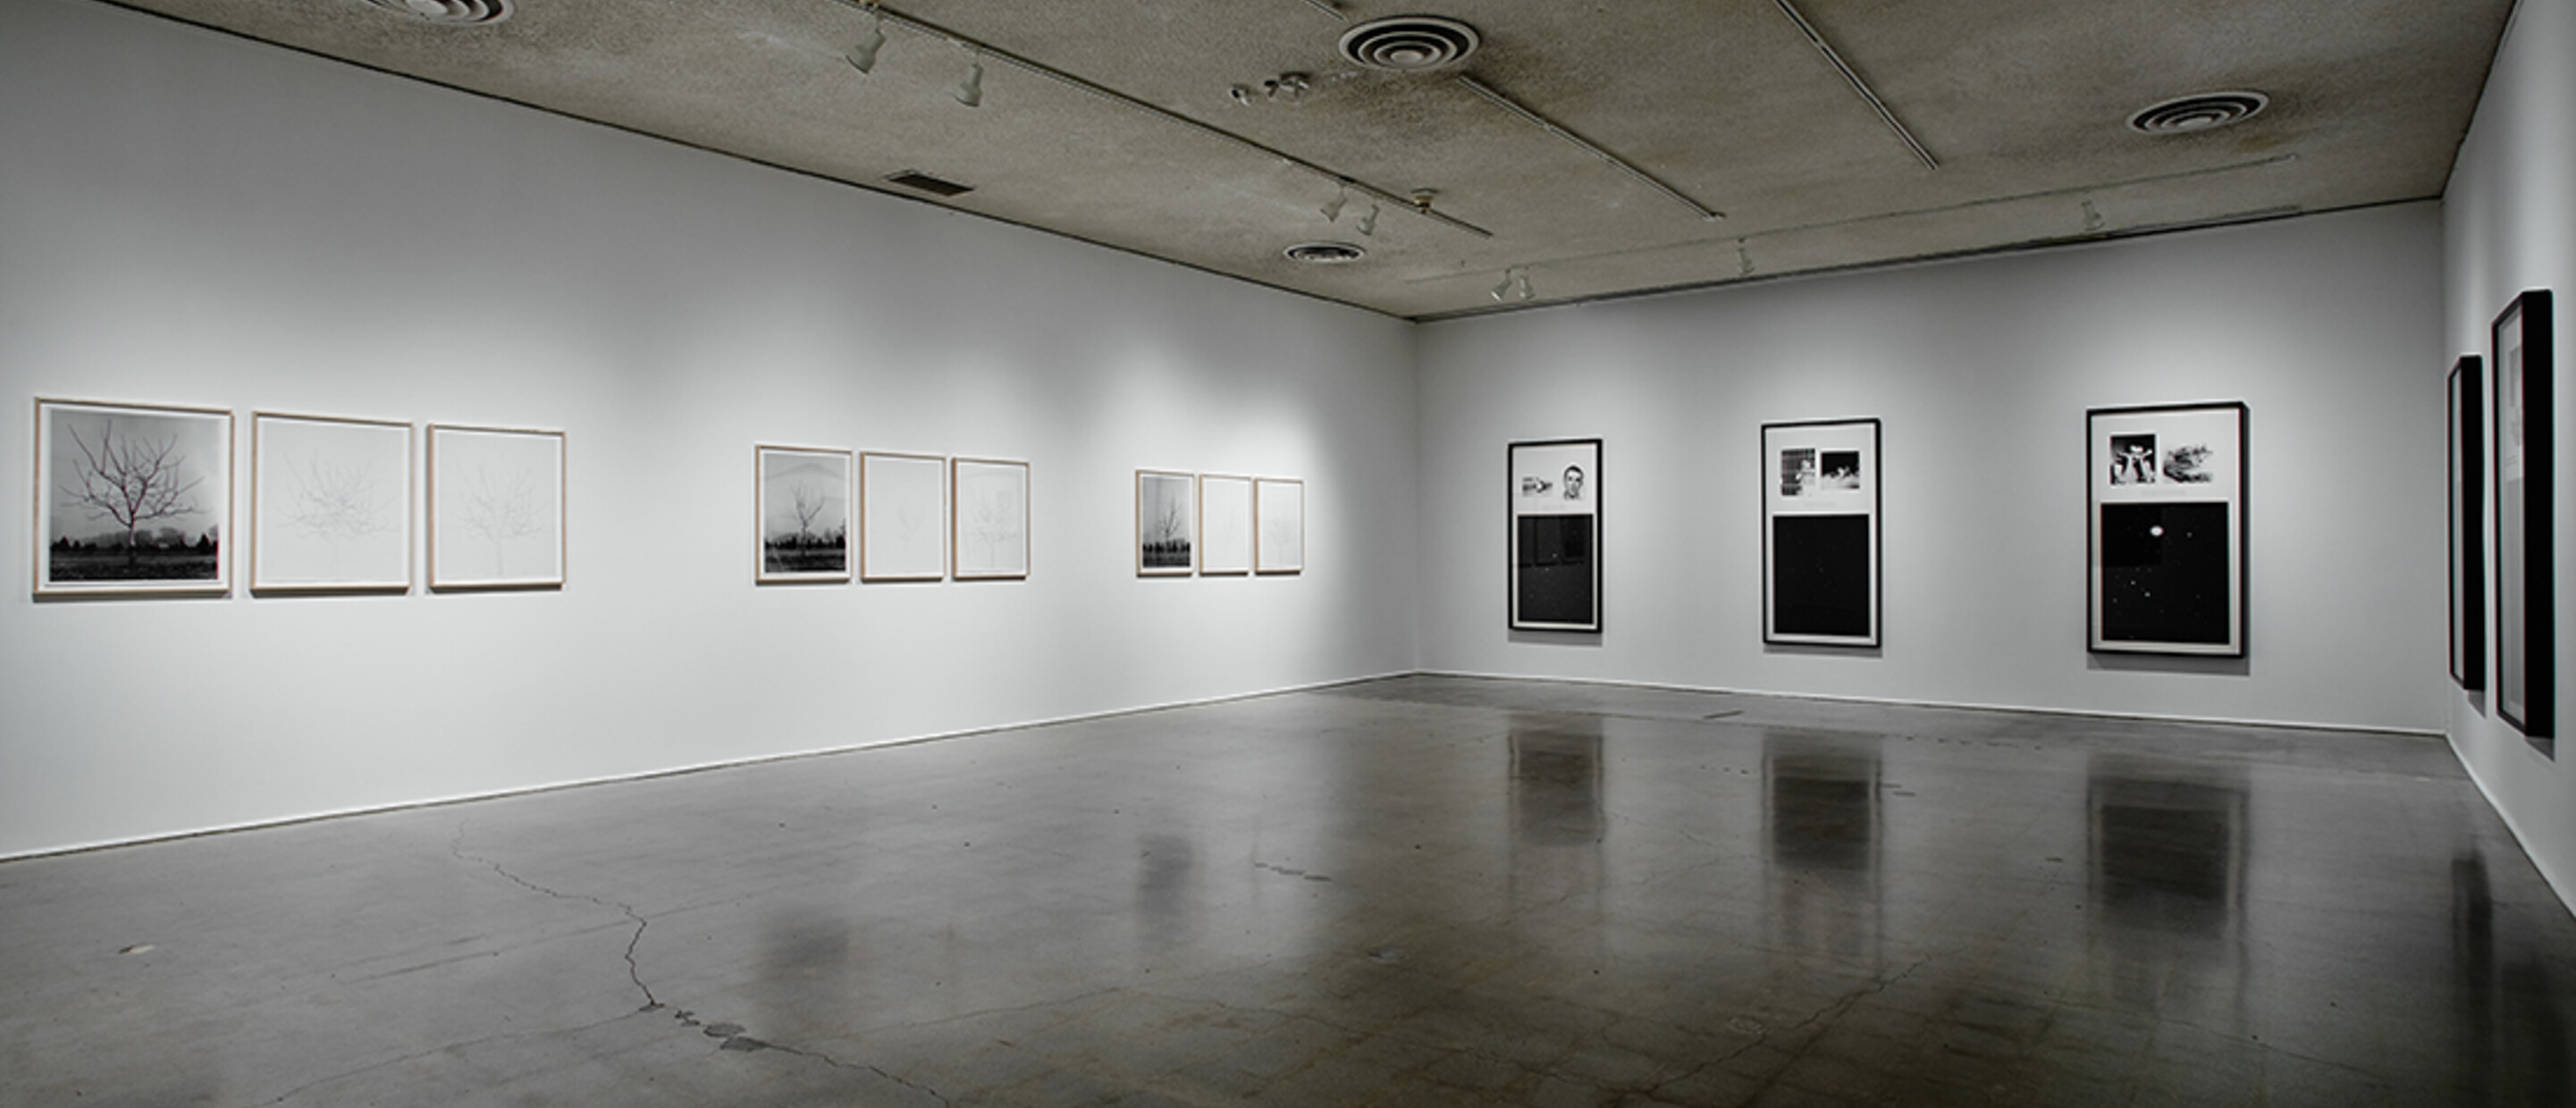 Installation view of In the Shadow of Numbers: Charles Gaines Selected Works from 1974 - 2012. Photo credit: Robert Wedemeyer